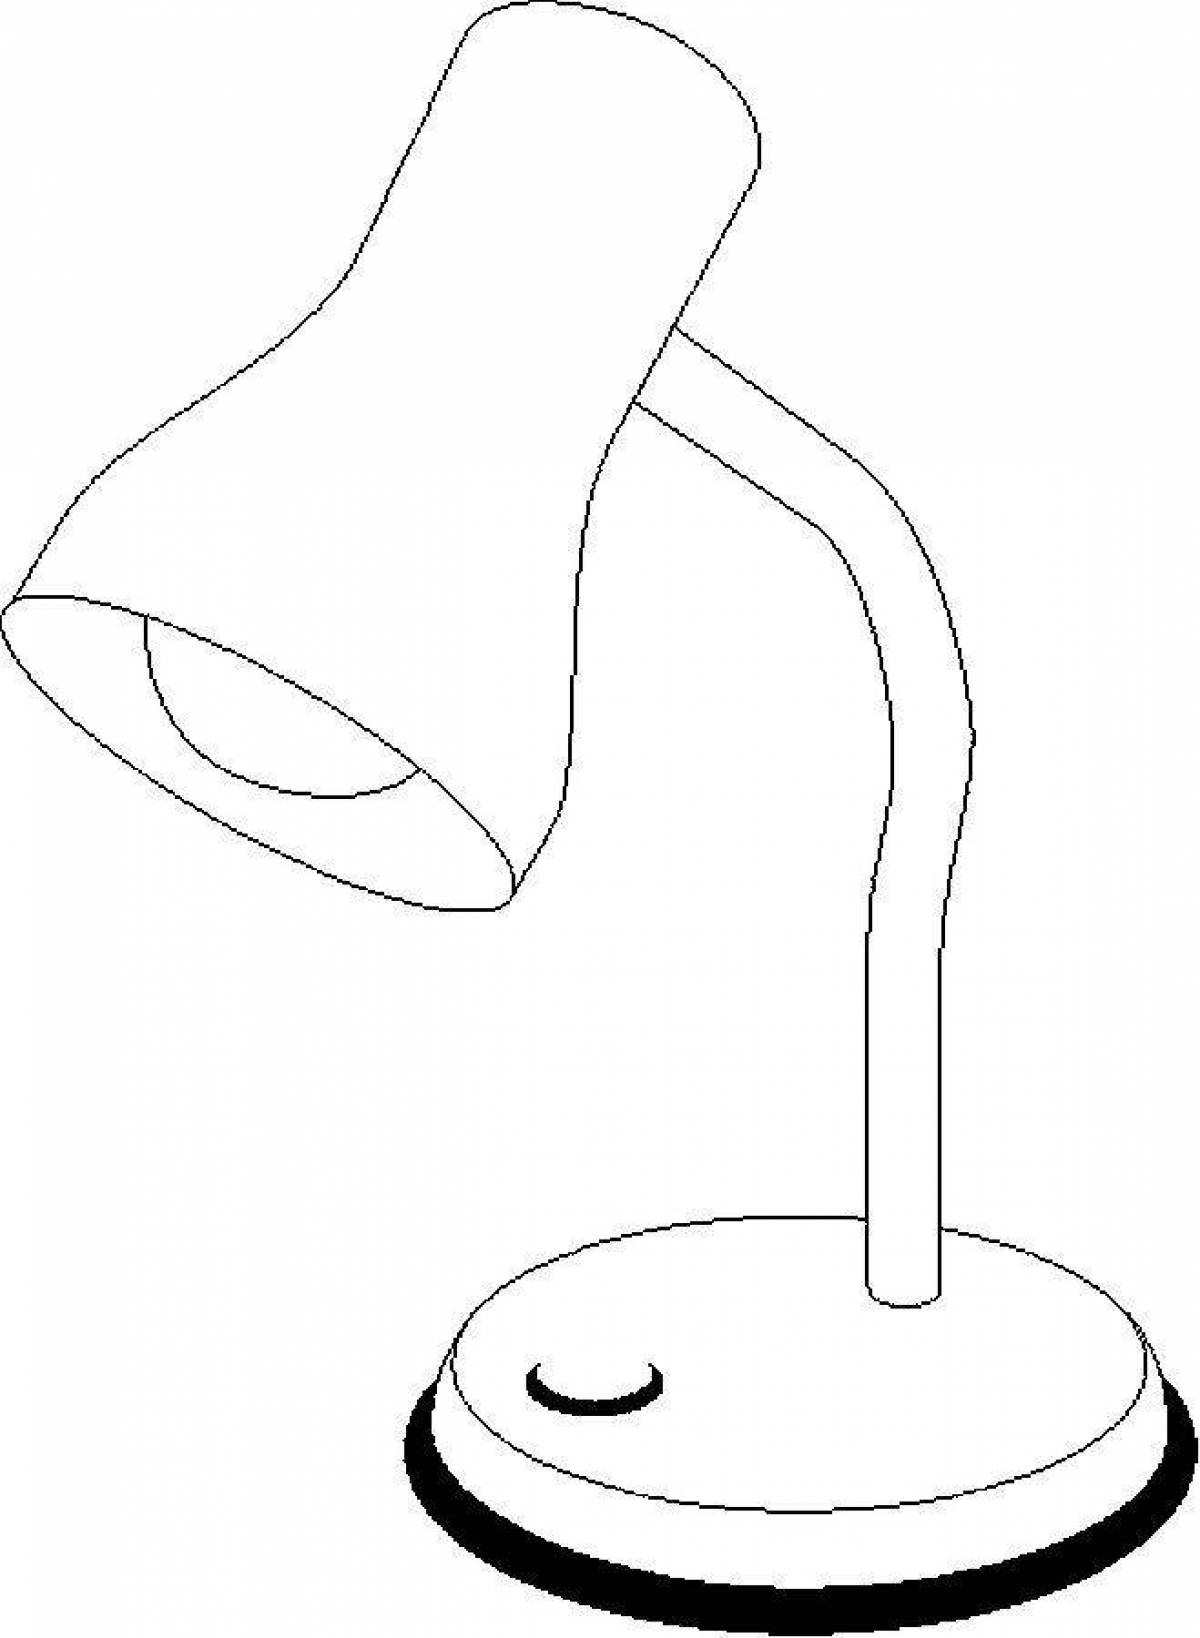 Complex lamp coloring page